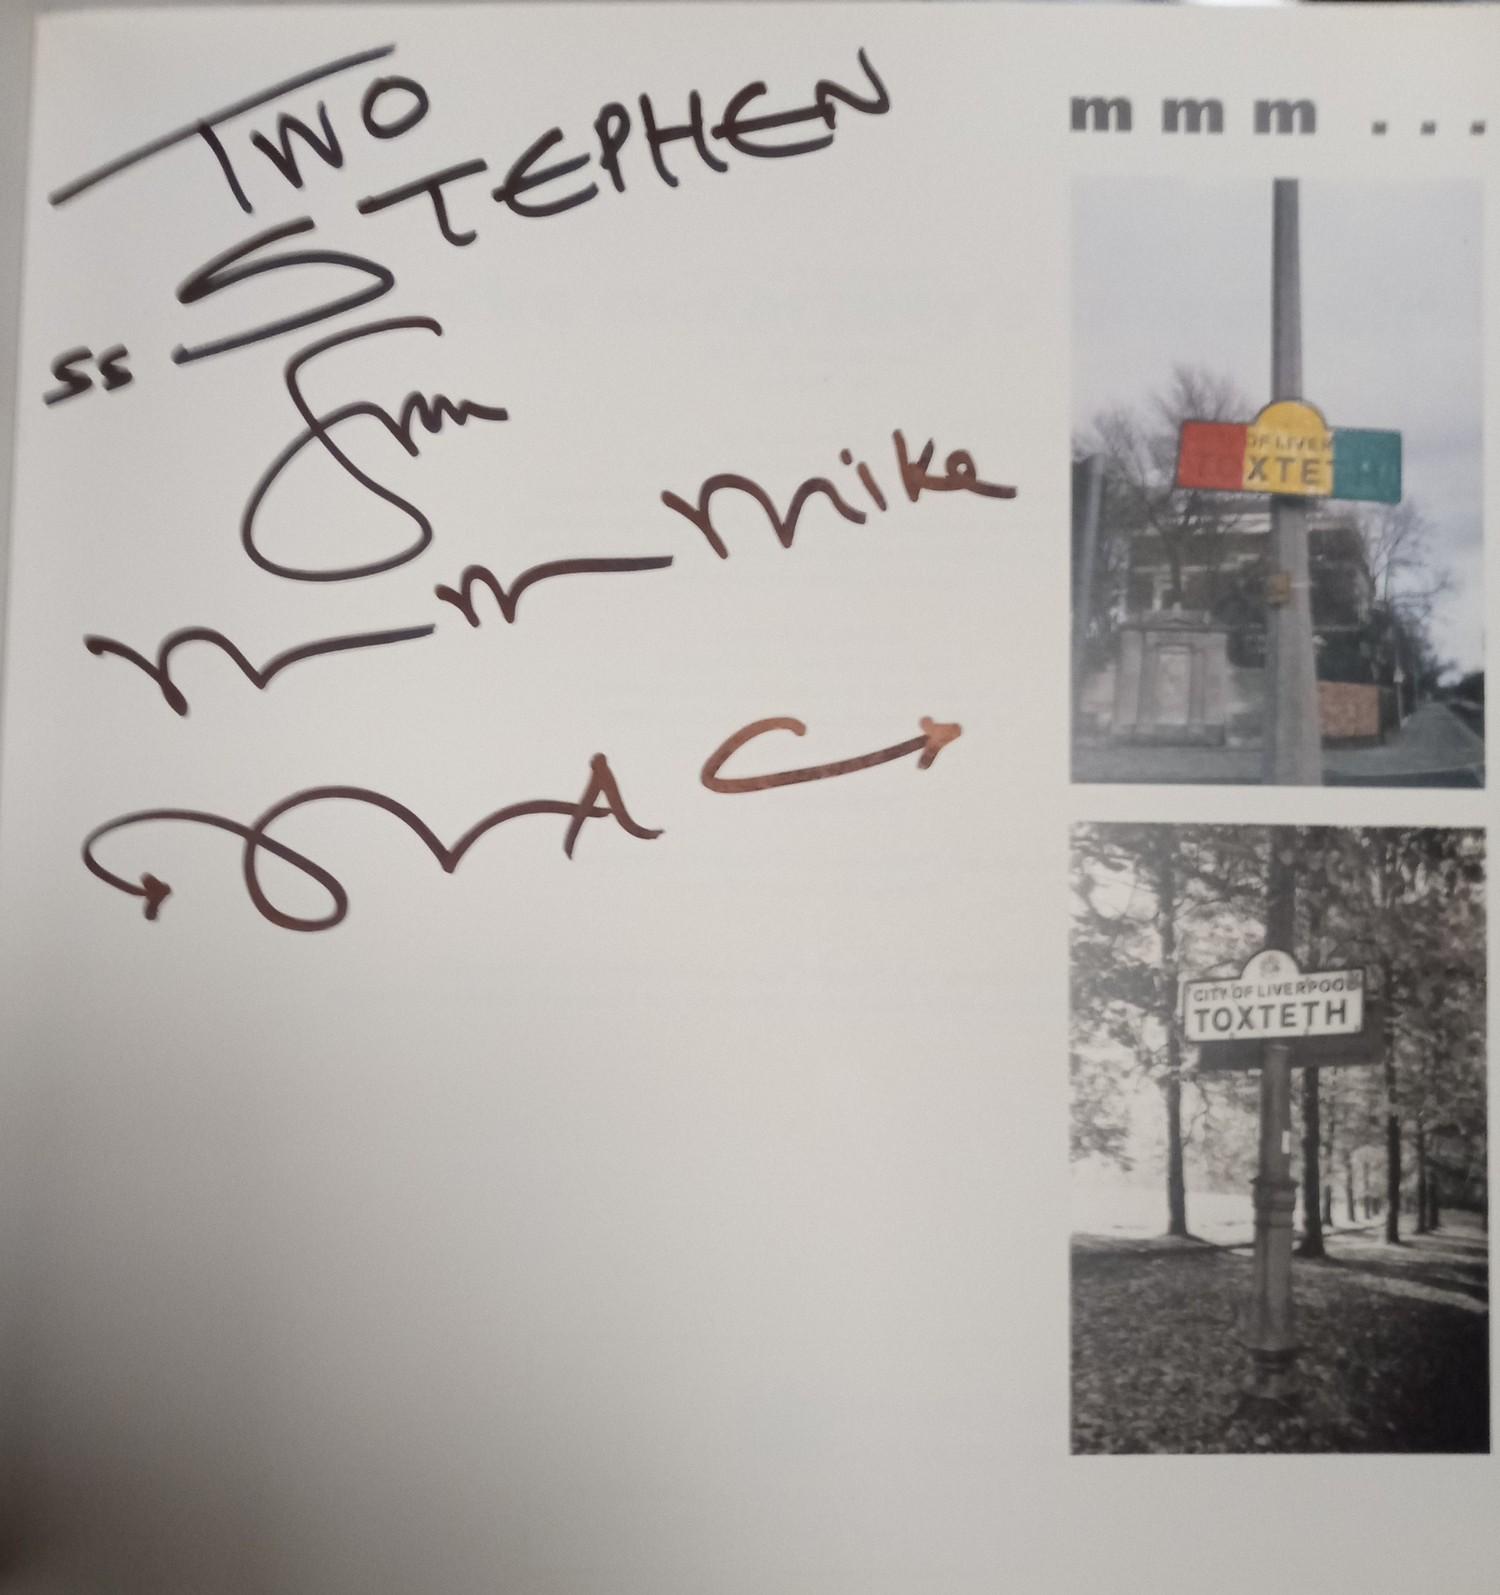 Mike McCartney's Merseyside book signed by Mike McCartney - Image 2 of 2